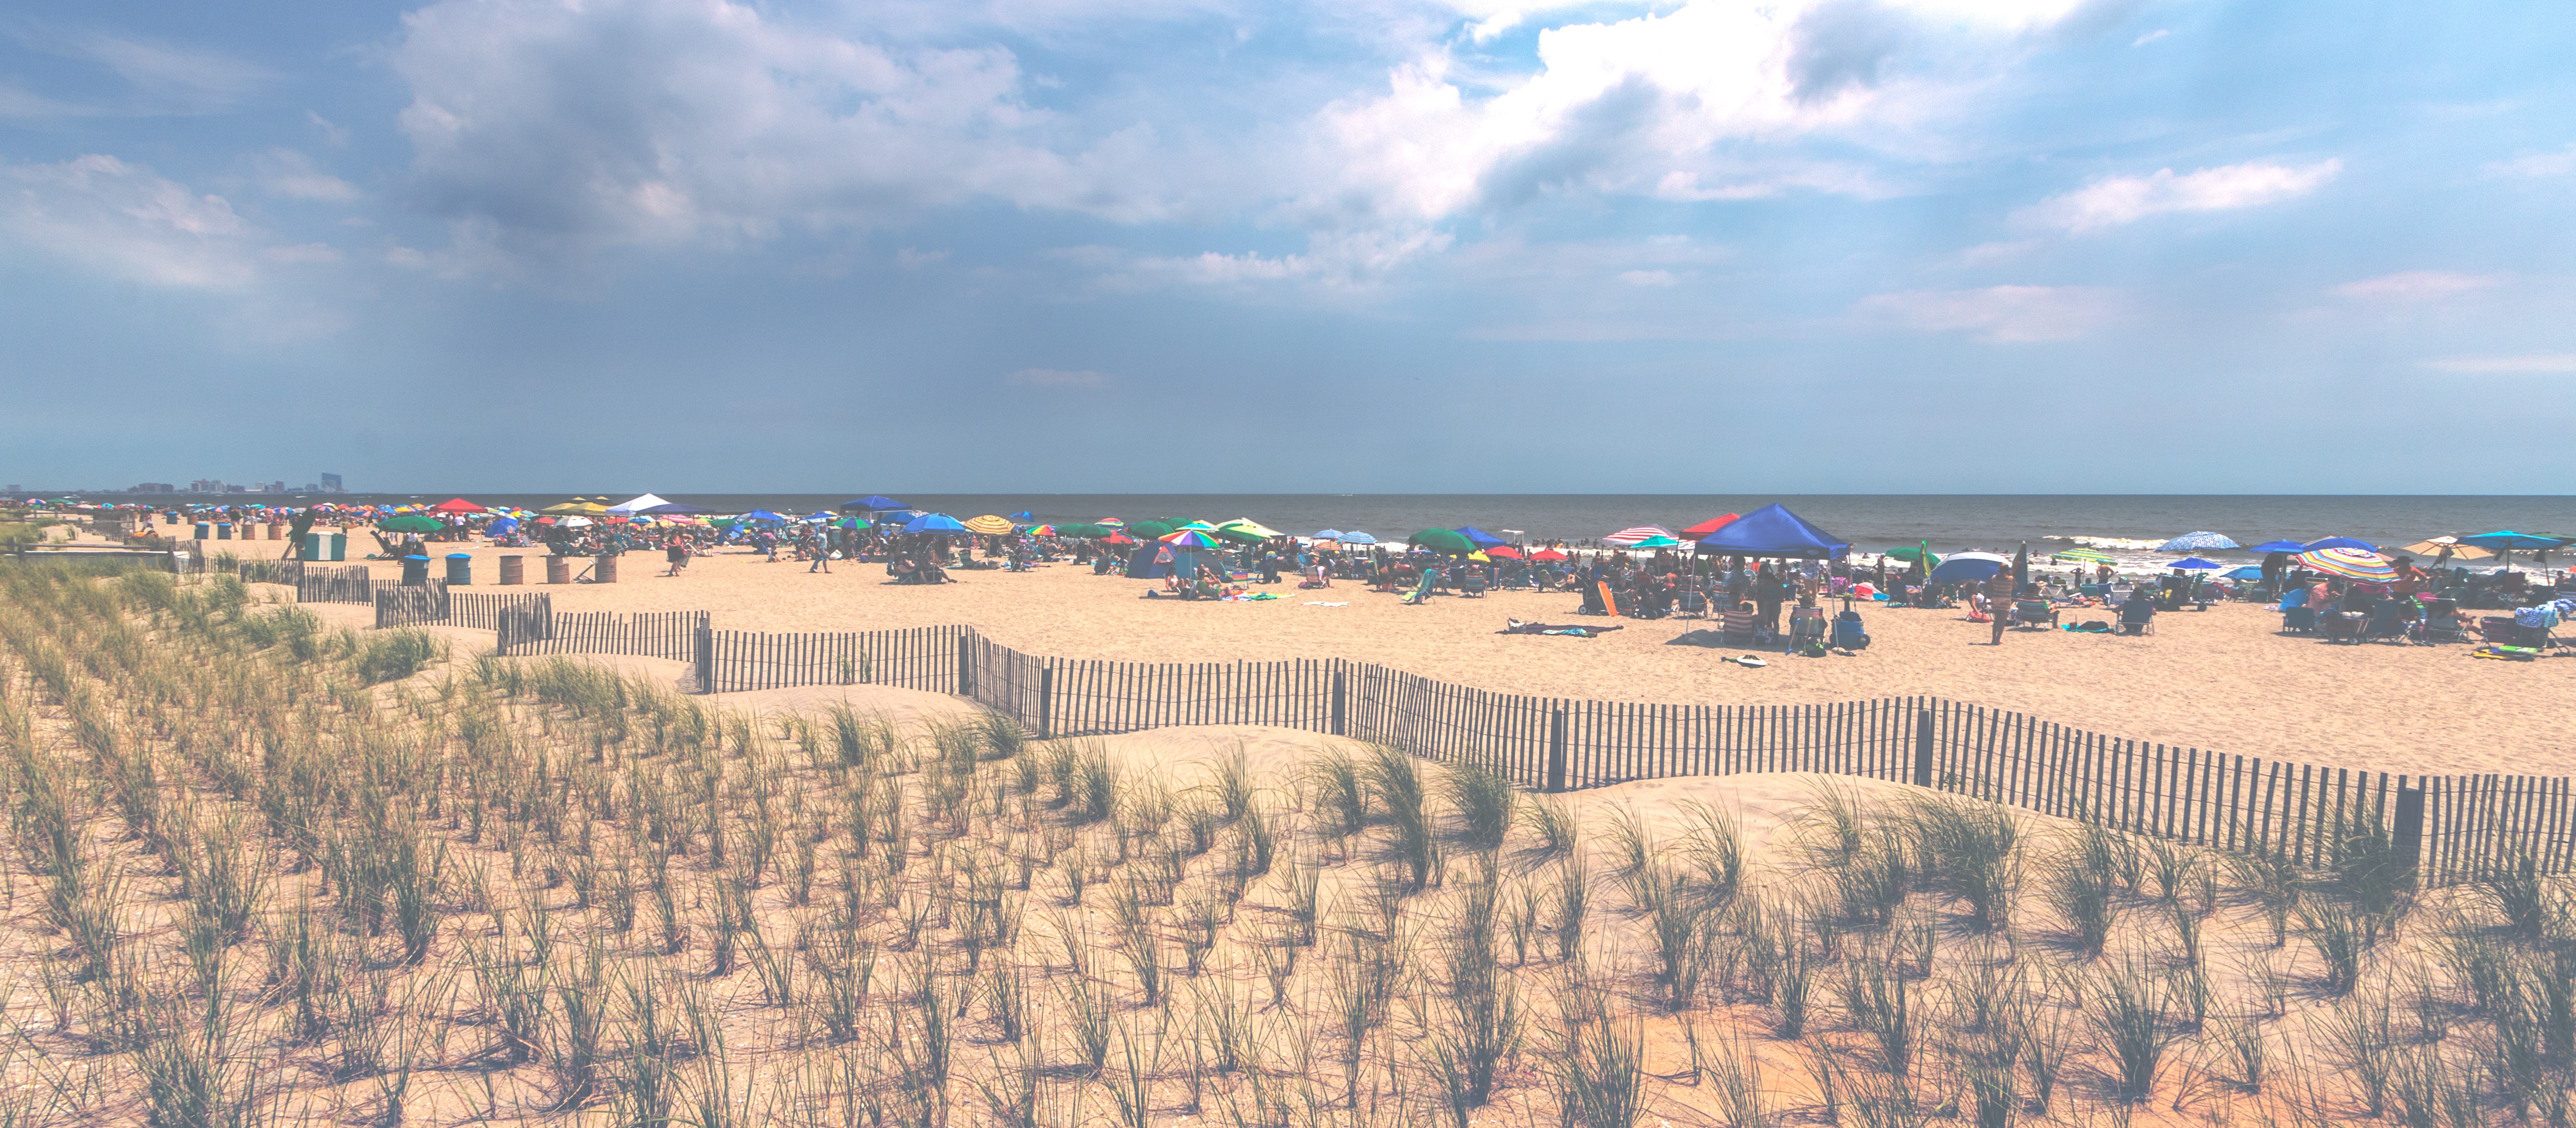 Dune grass and fence on the beach in Ocean City, Maryland. Plenty of patrons on the beach near the water with umbrellas and chairs.